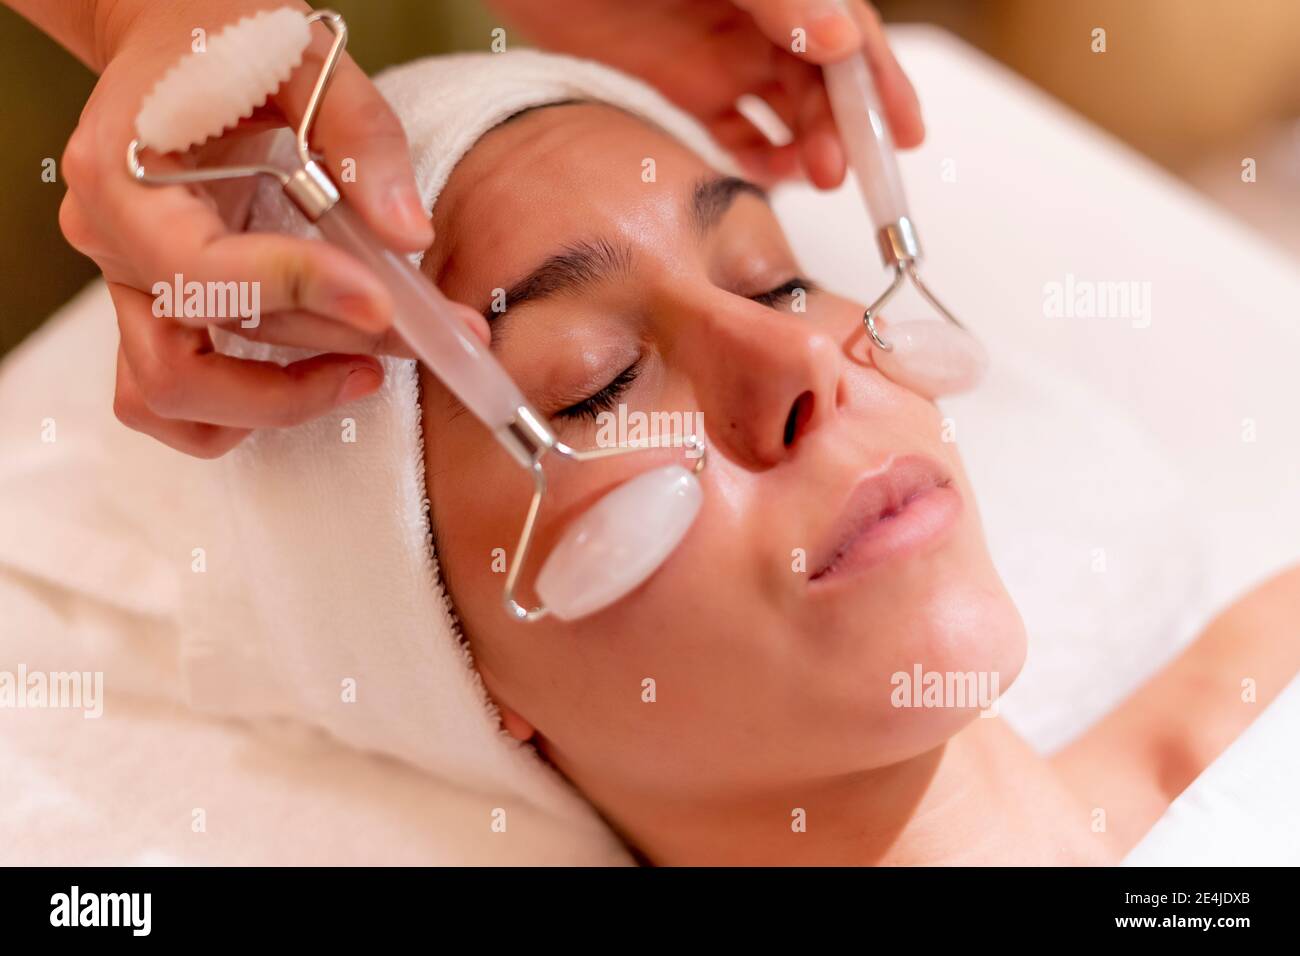 Young female customer receiving facial massage during spa treatment from beautician Stock Photo